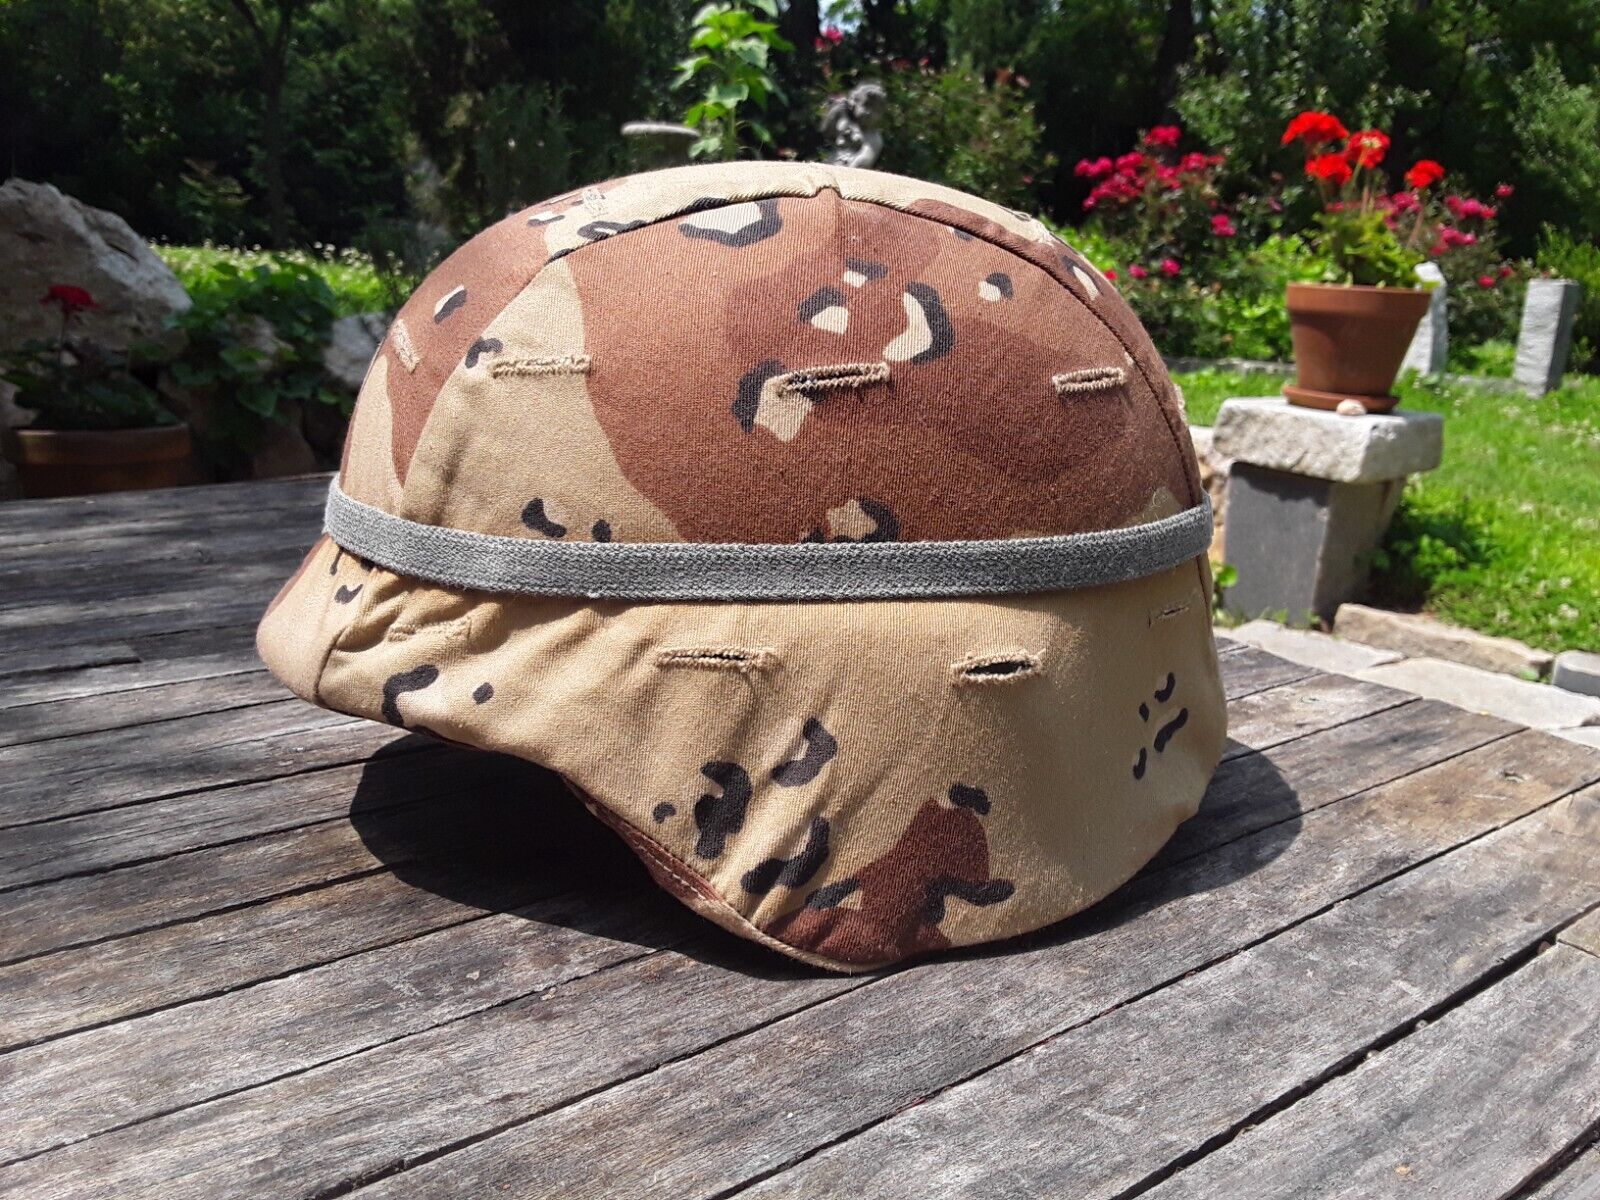 US Army PASGT Ballistic Military Helmet Made With Kevlar Size M